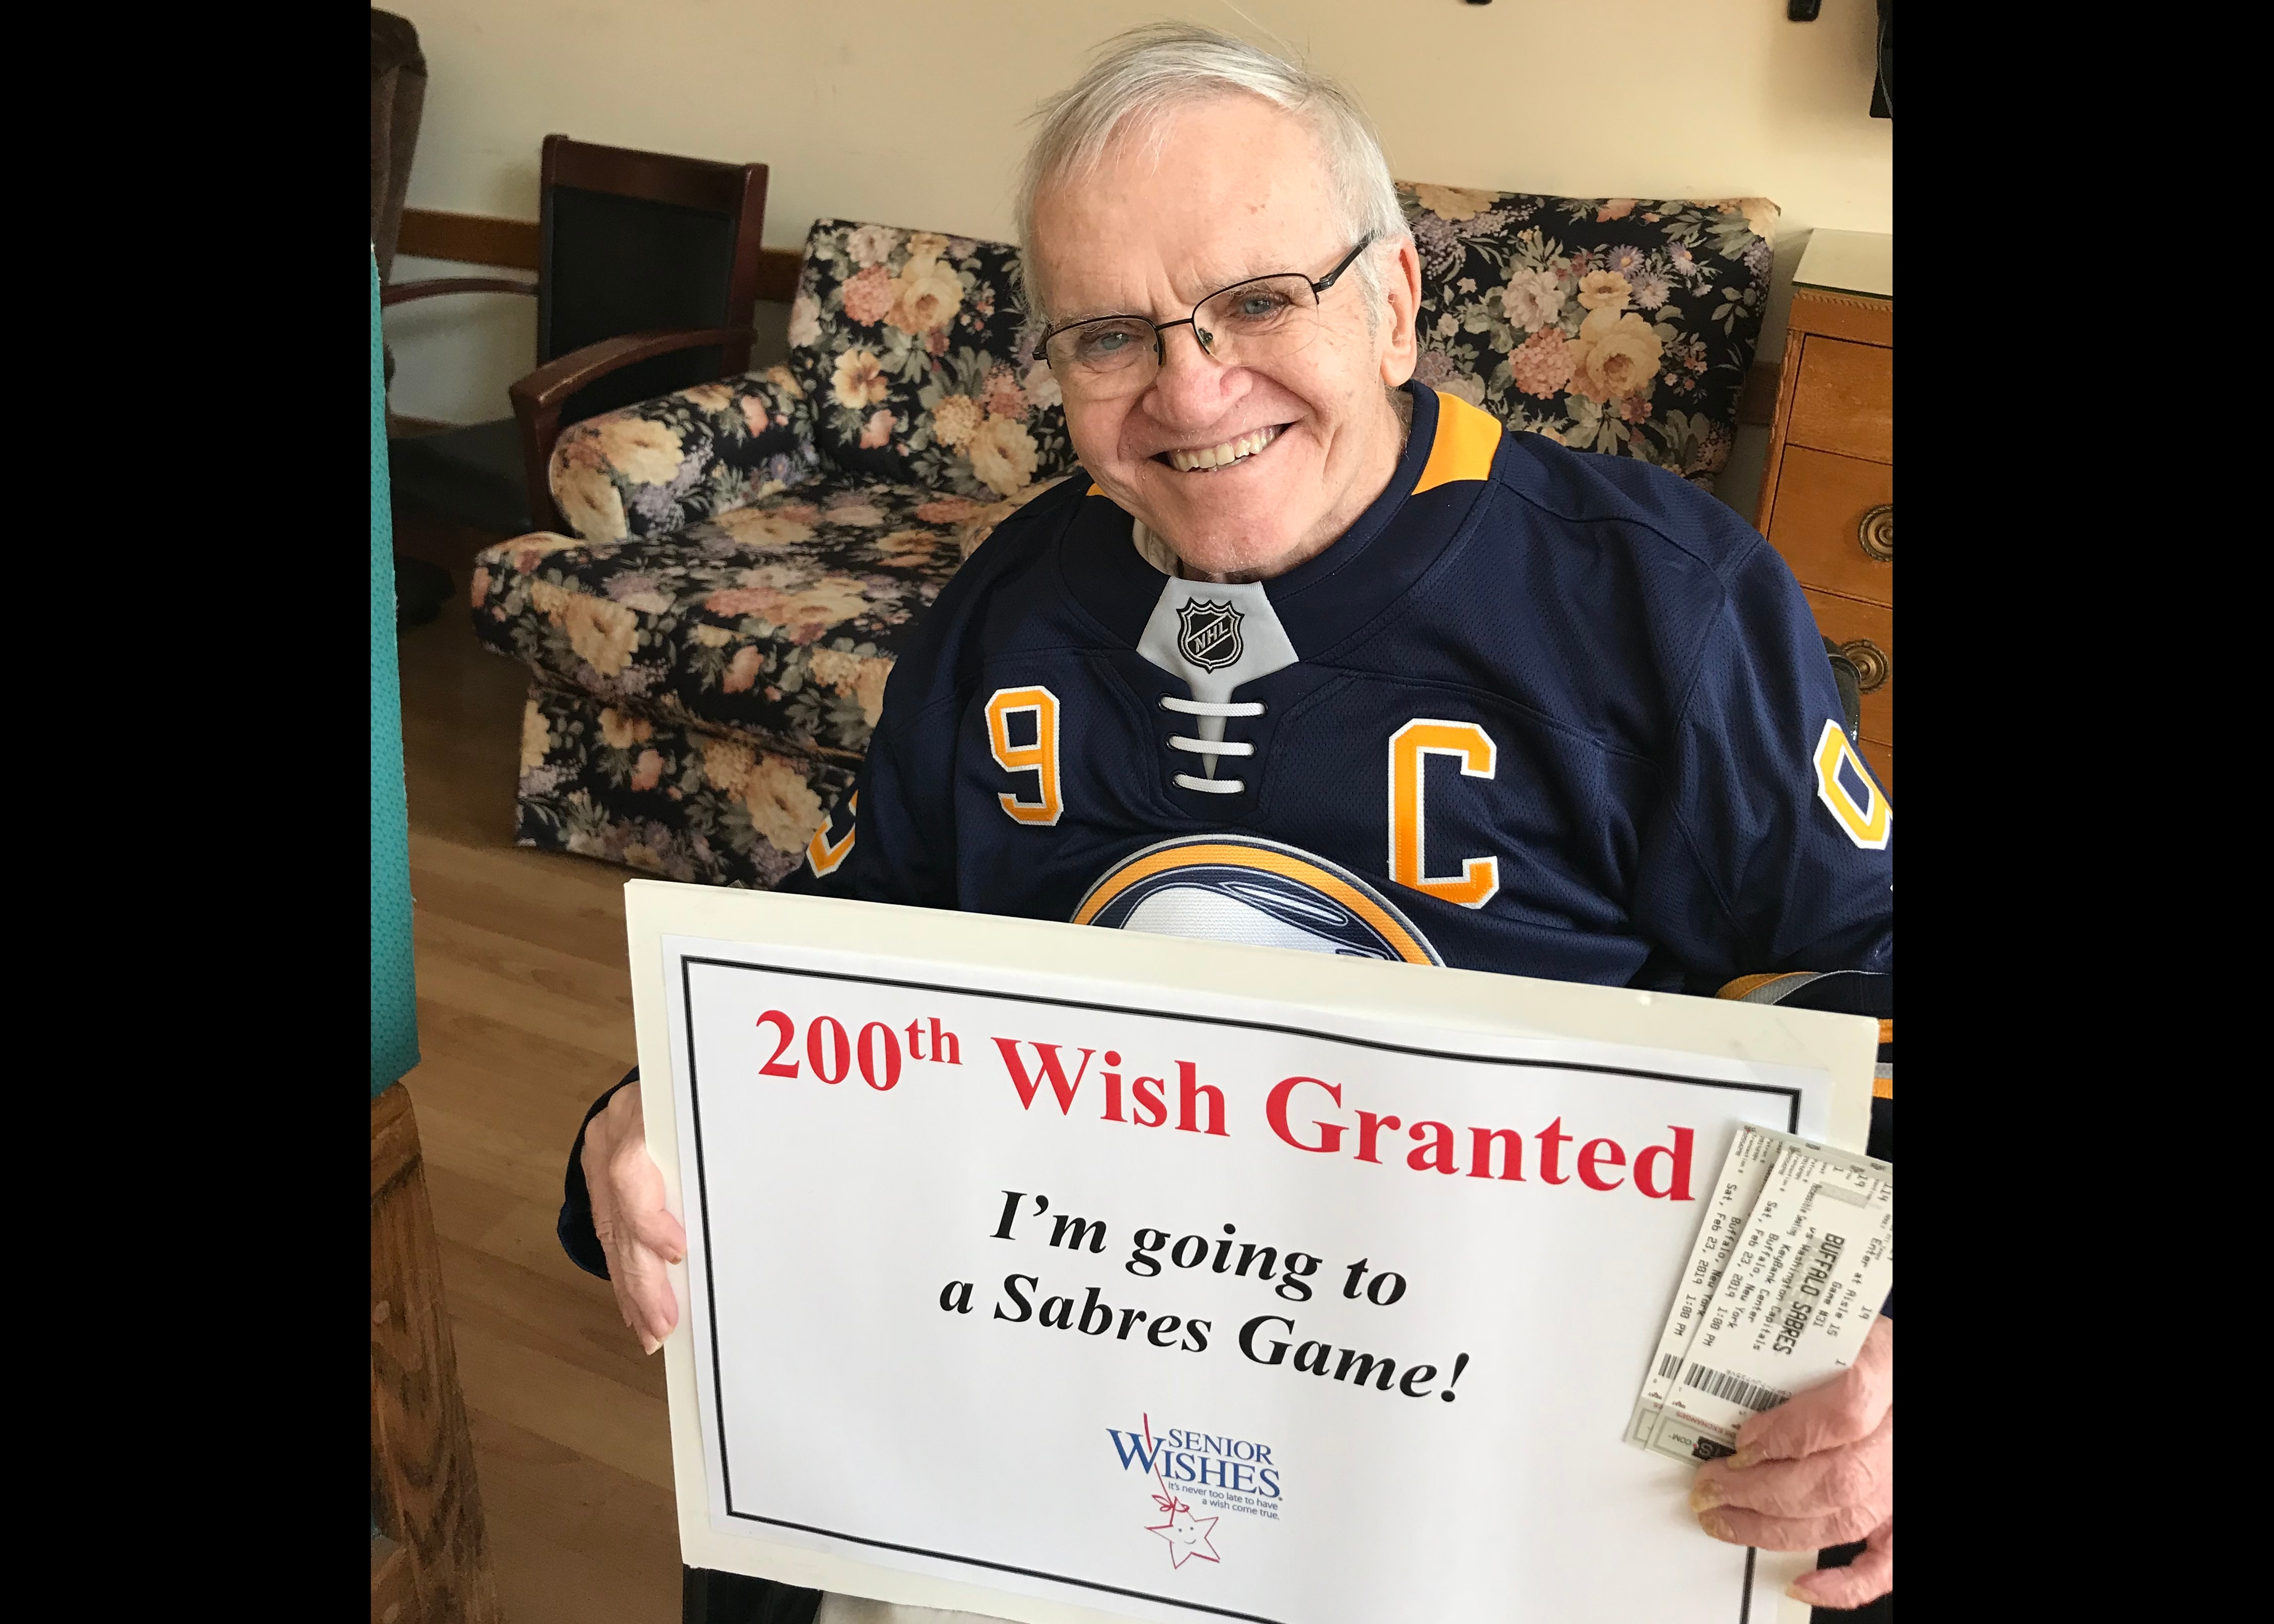 Our 200th Wish!  A Wish to go to a Sabres game Image